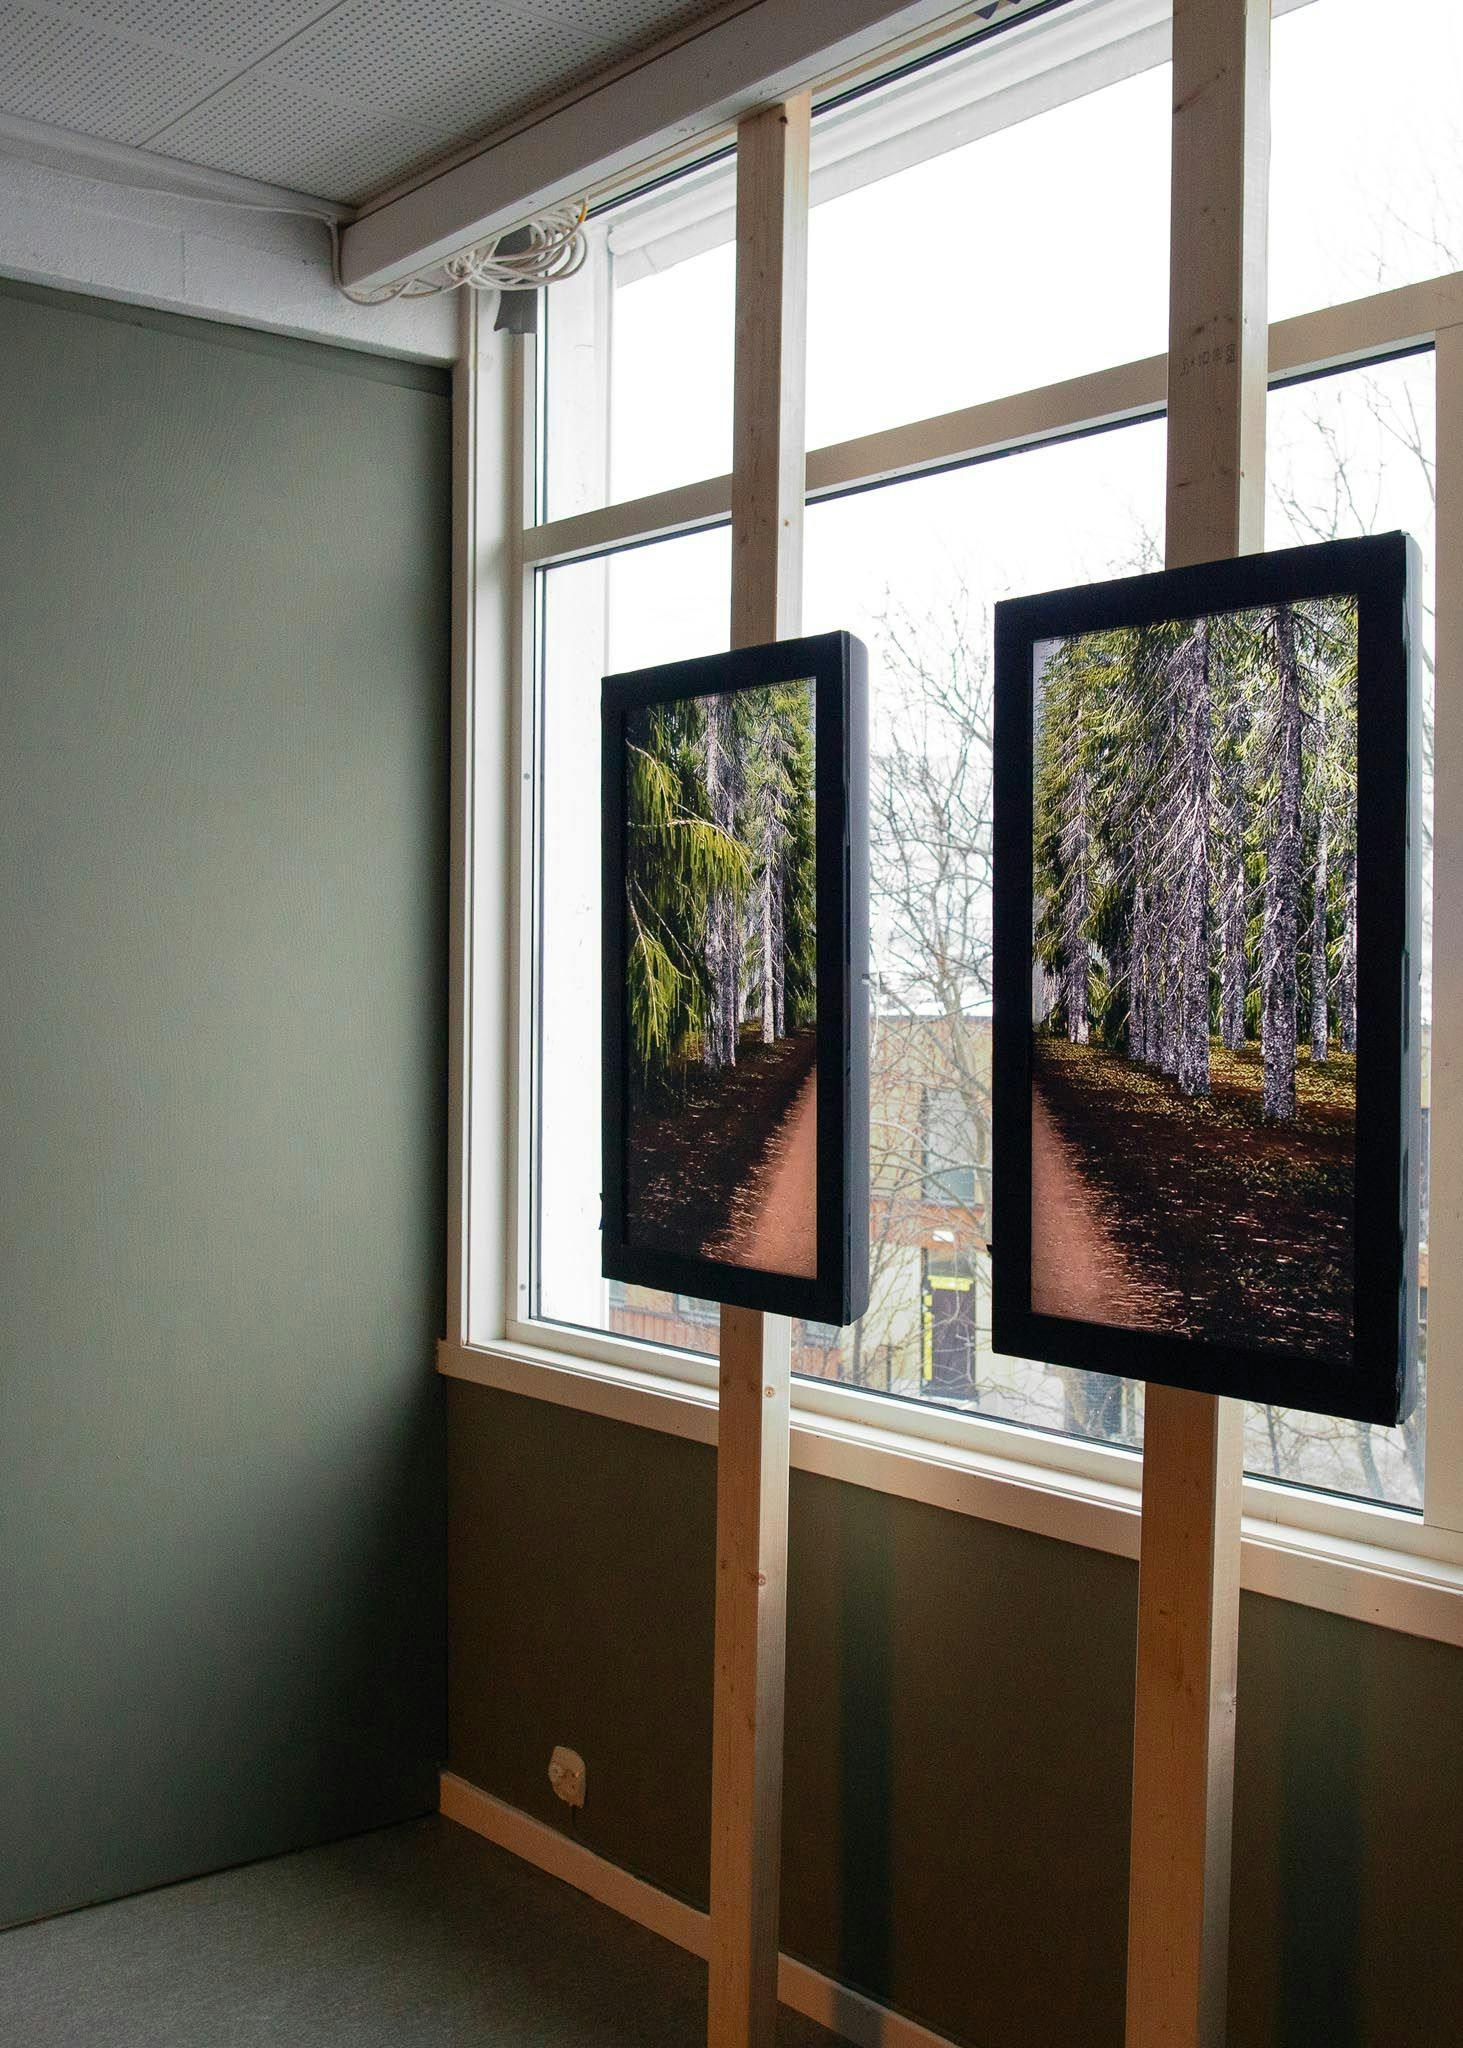 Two screens mounted vertically in front of a window, each showing one half of the film.